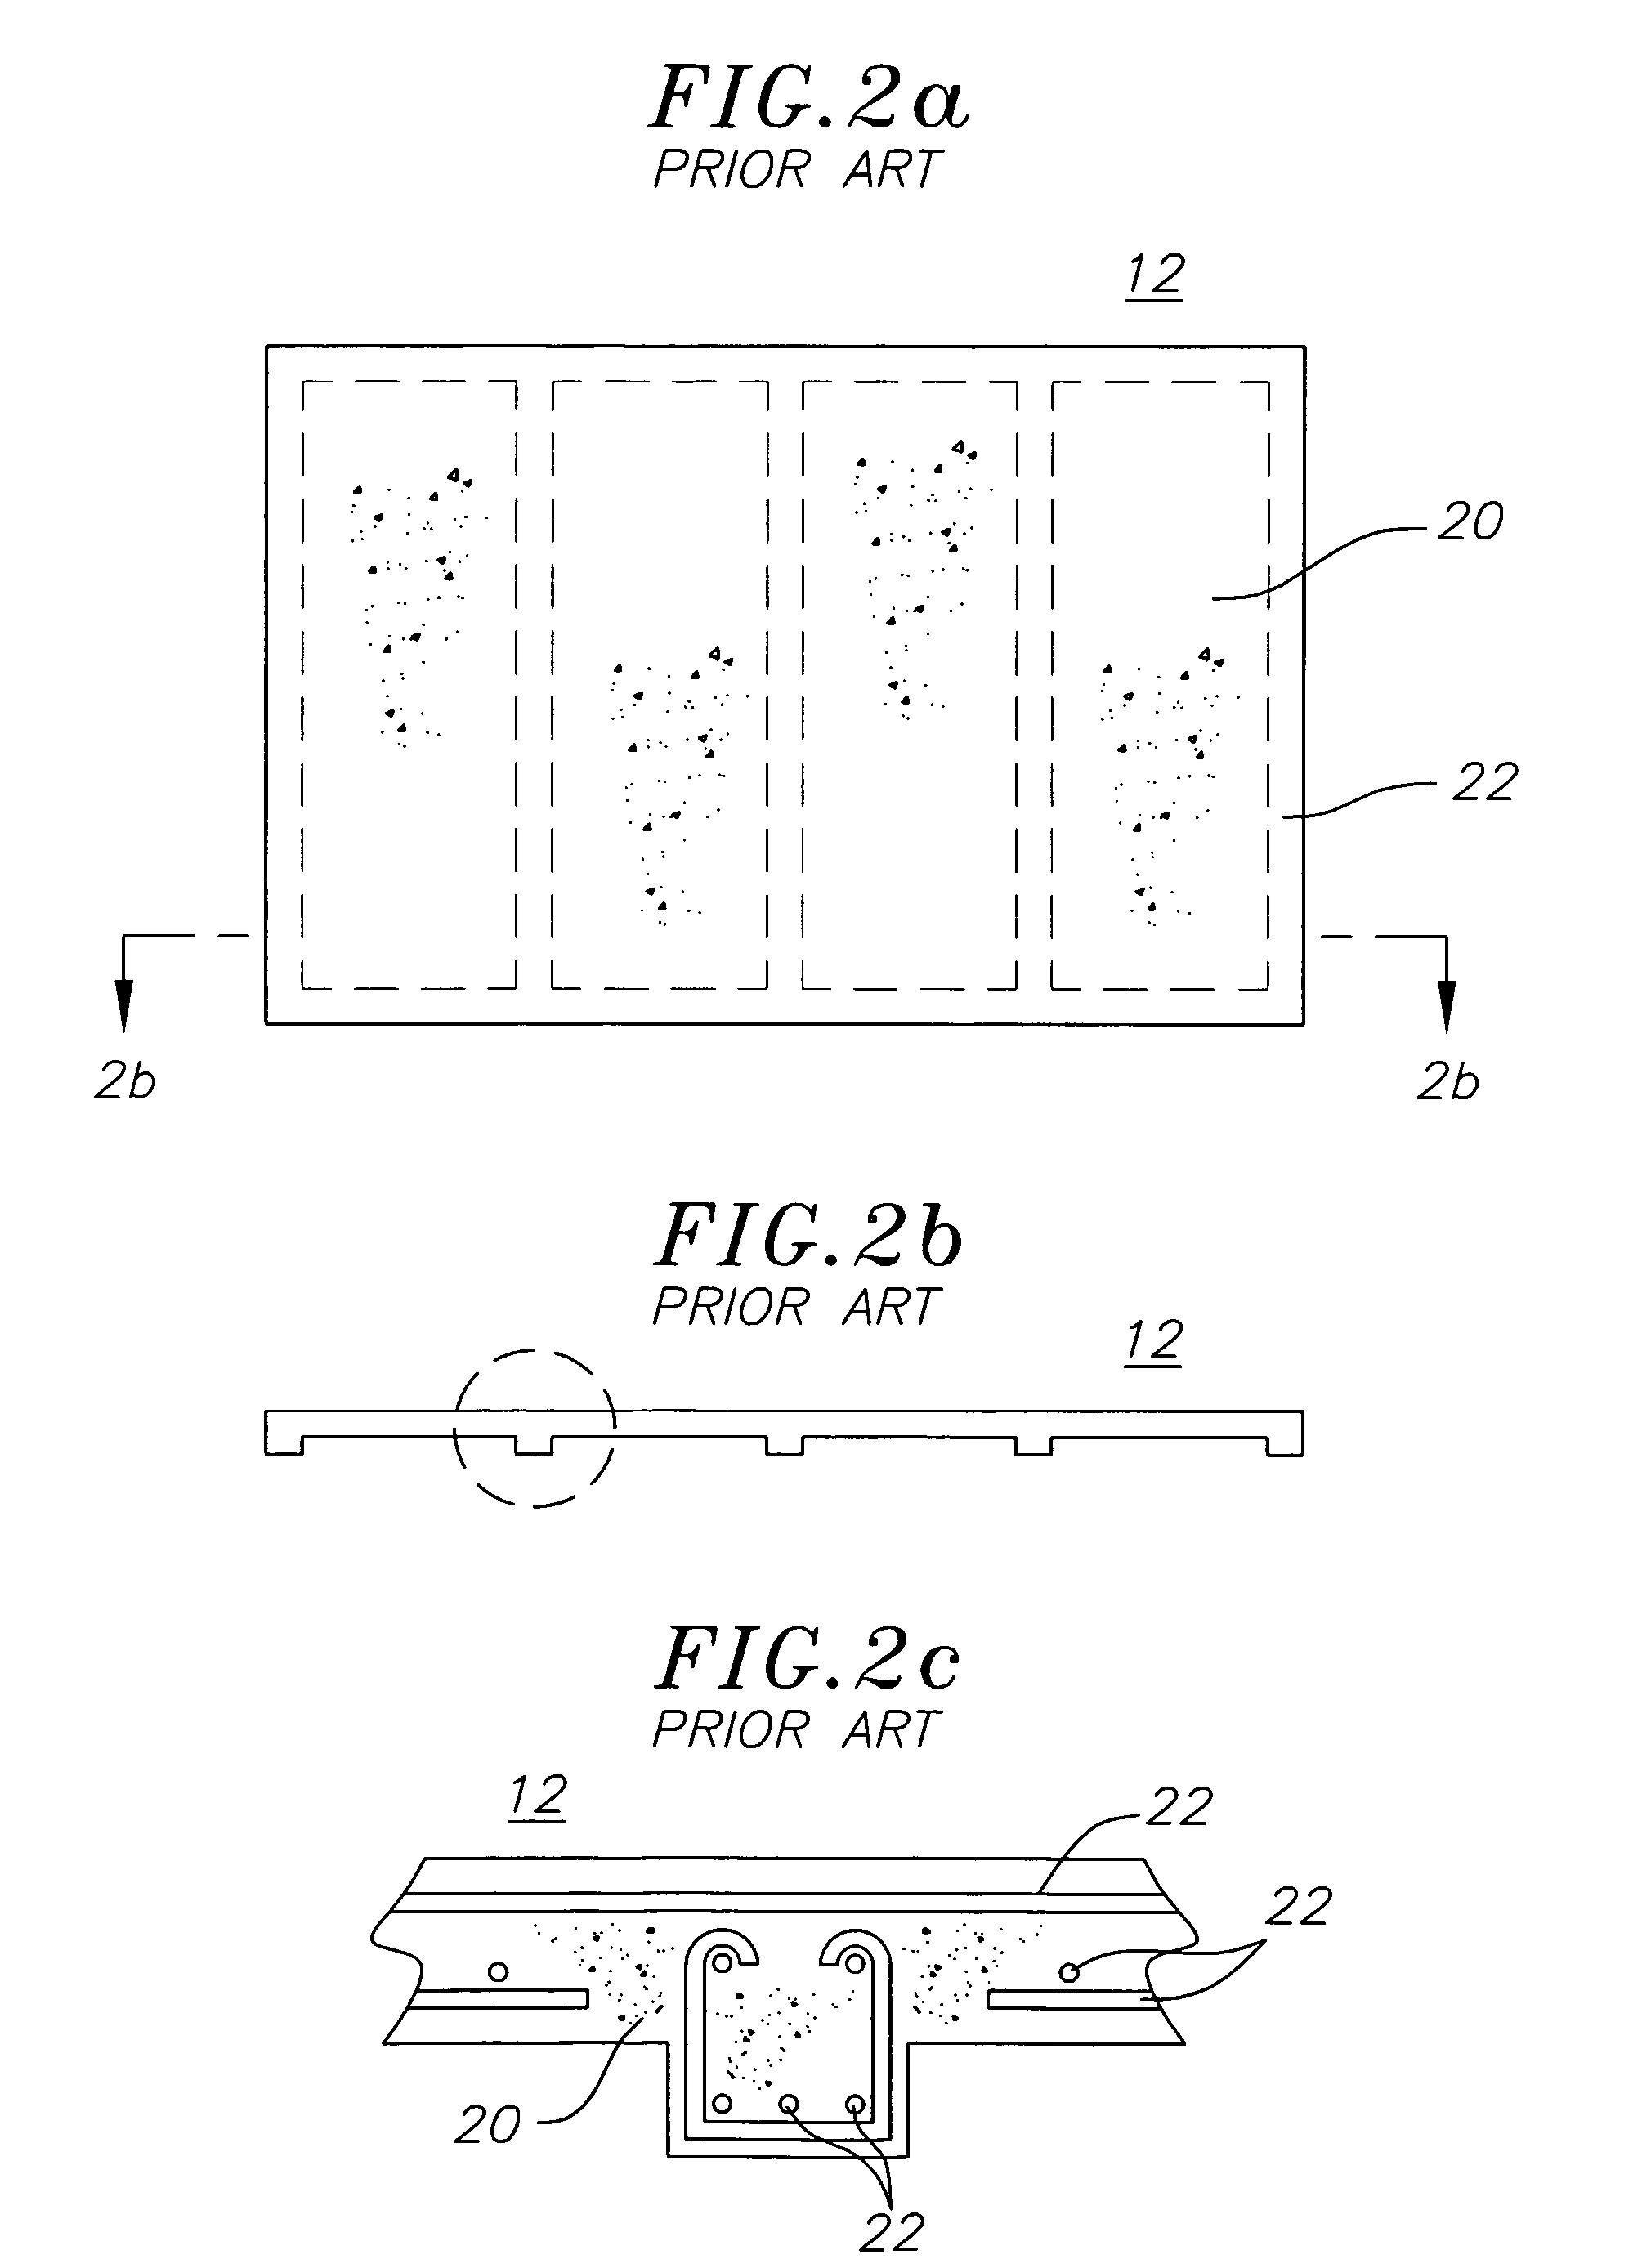 Method of constructing structures with seismically-isolated base